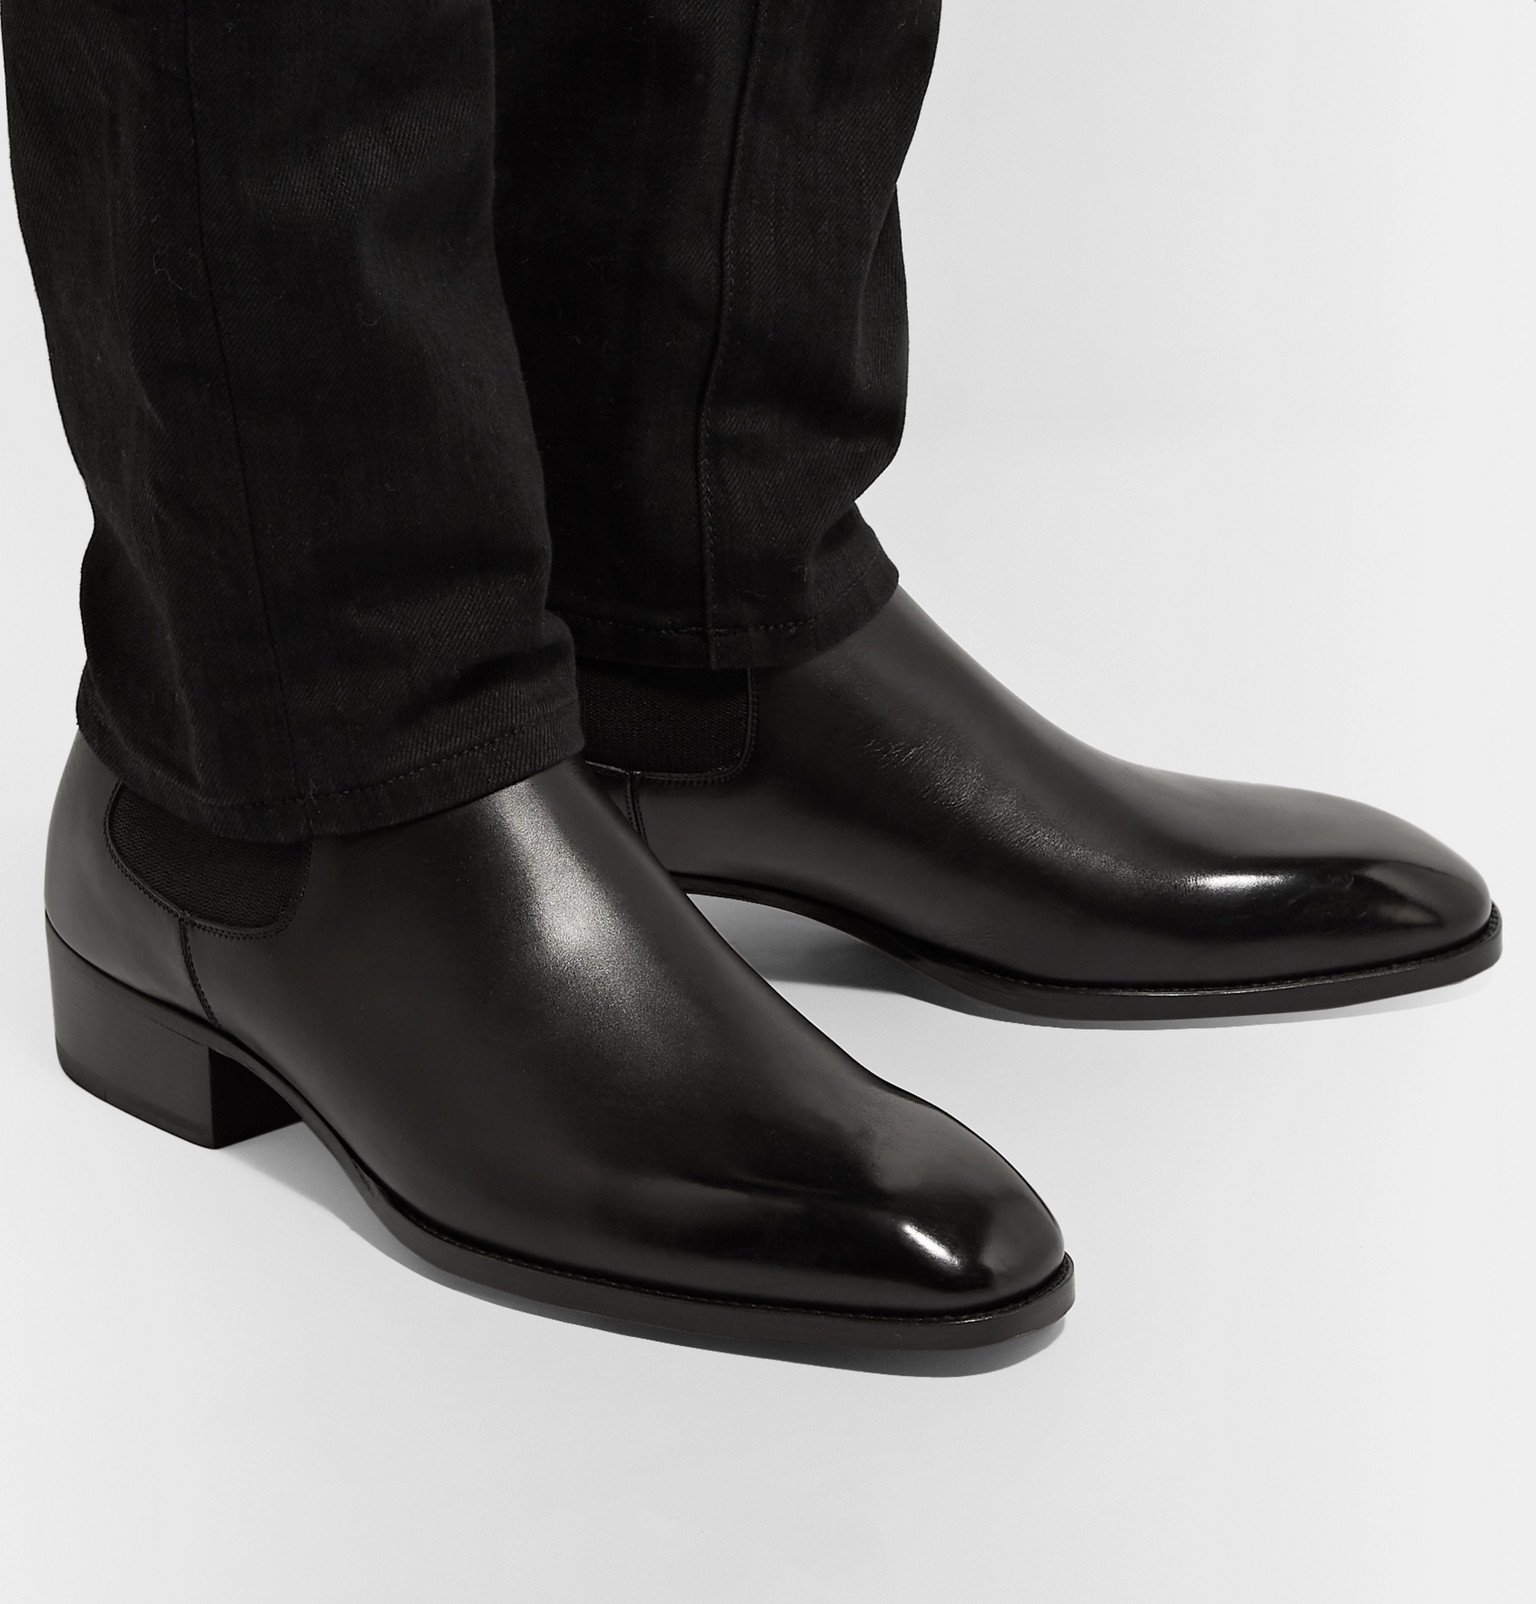 TOM FORD - Hainaut Polished-Leather Chelsea Boots - Black TOM FORD